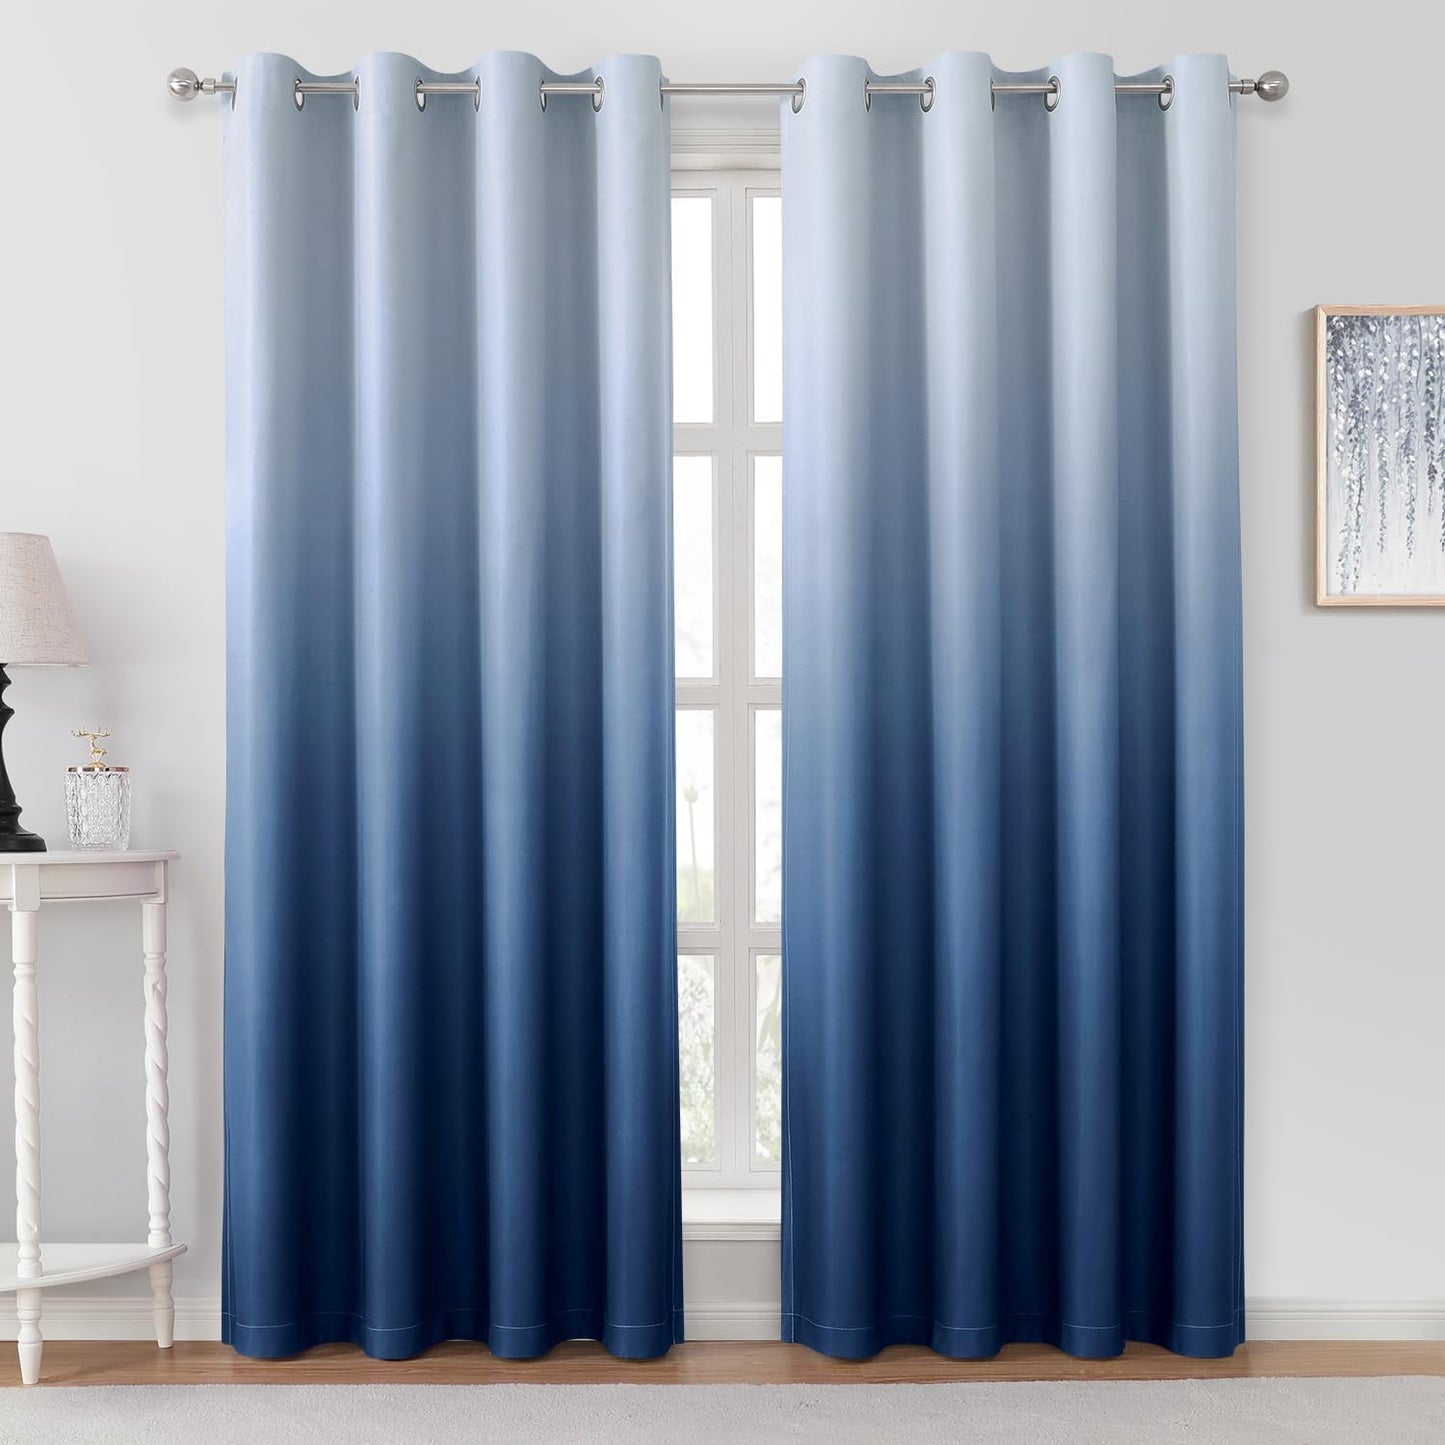 HOMEIDEAS Navy Blue Ombre Blackout Curtains 52 X 84 Inch Length Gradient Room Darkening Thermal Insulated Energy Saving Grommet 2 Panels Window Drapes for Living Room/Bedroom  HOMEIDEAS Navy Blue 52"W X 96"L 